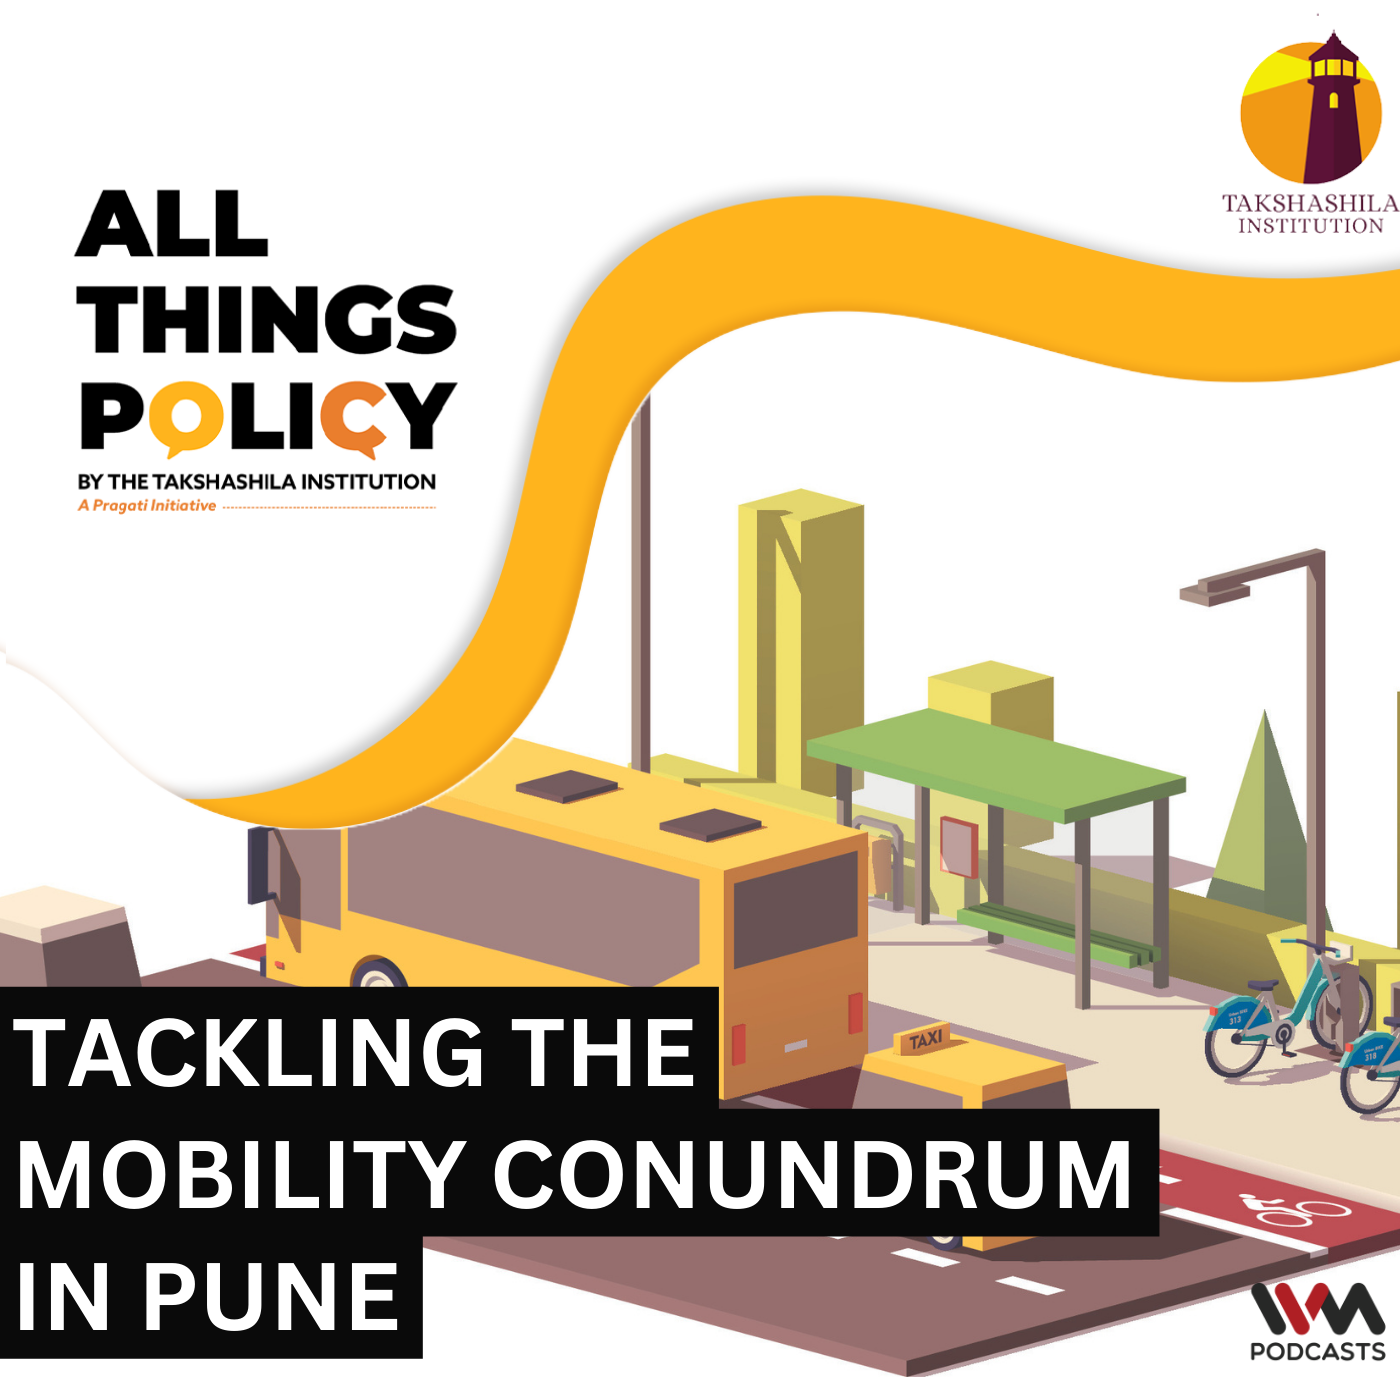 Tackling the Mobility Conundrum in Pune